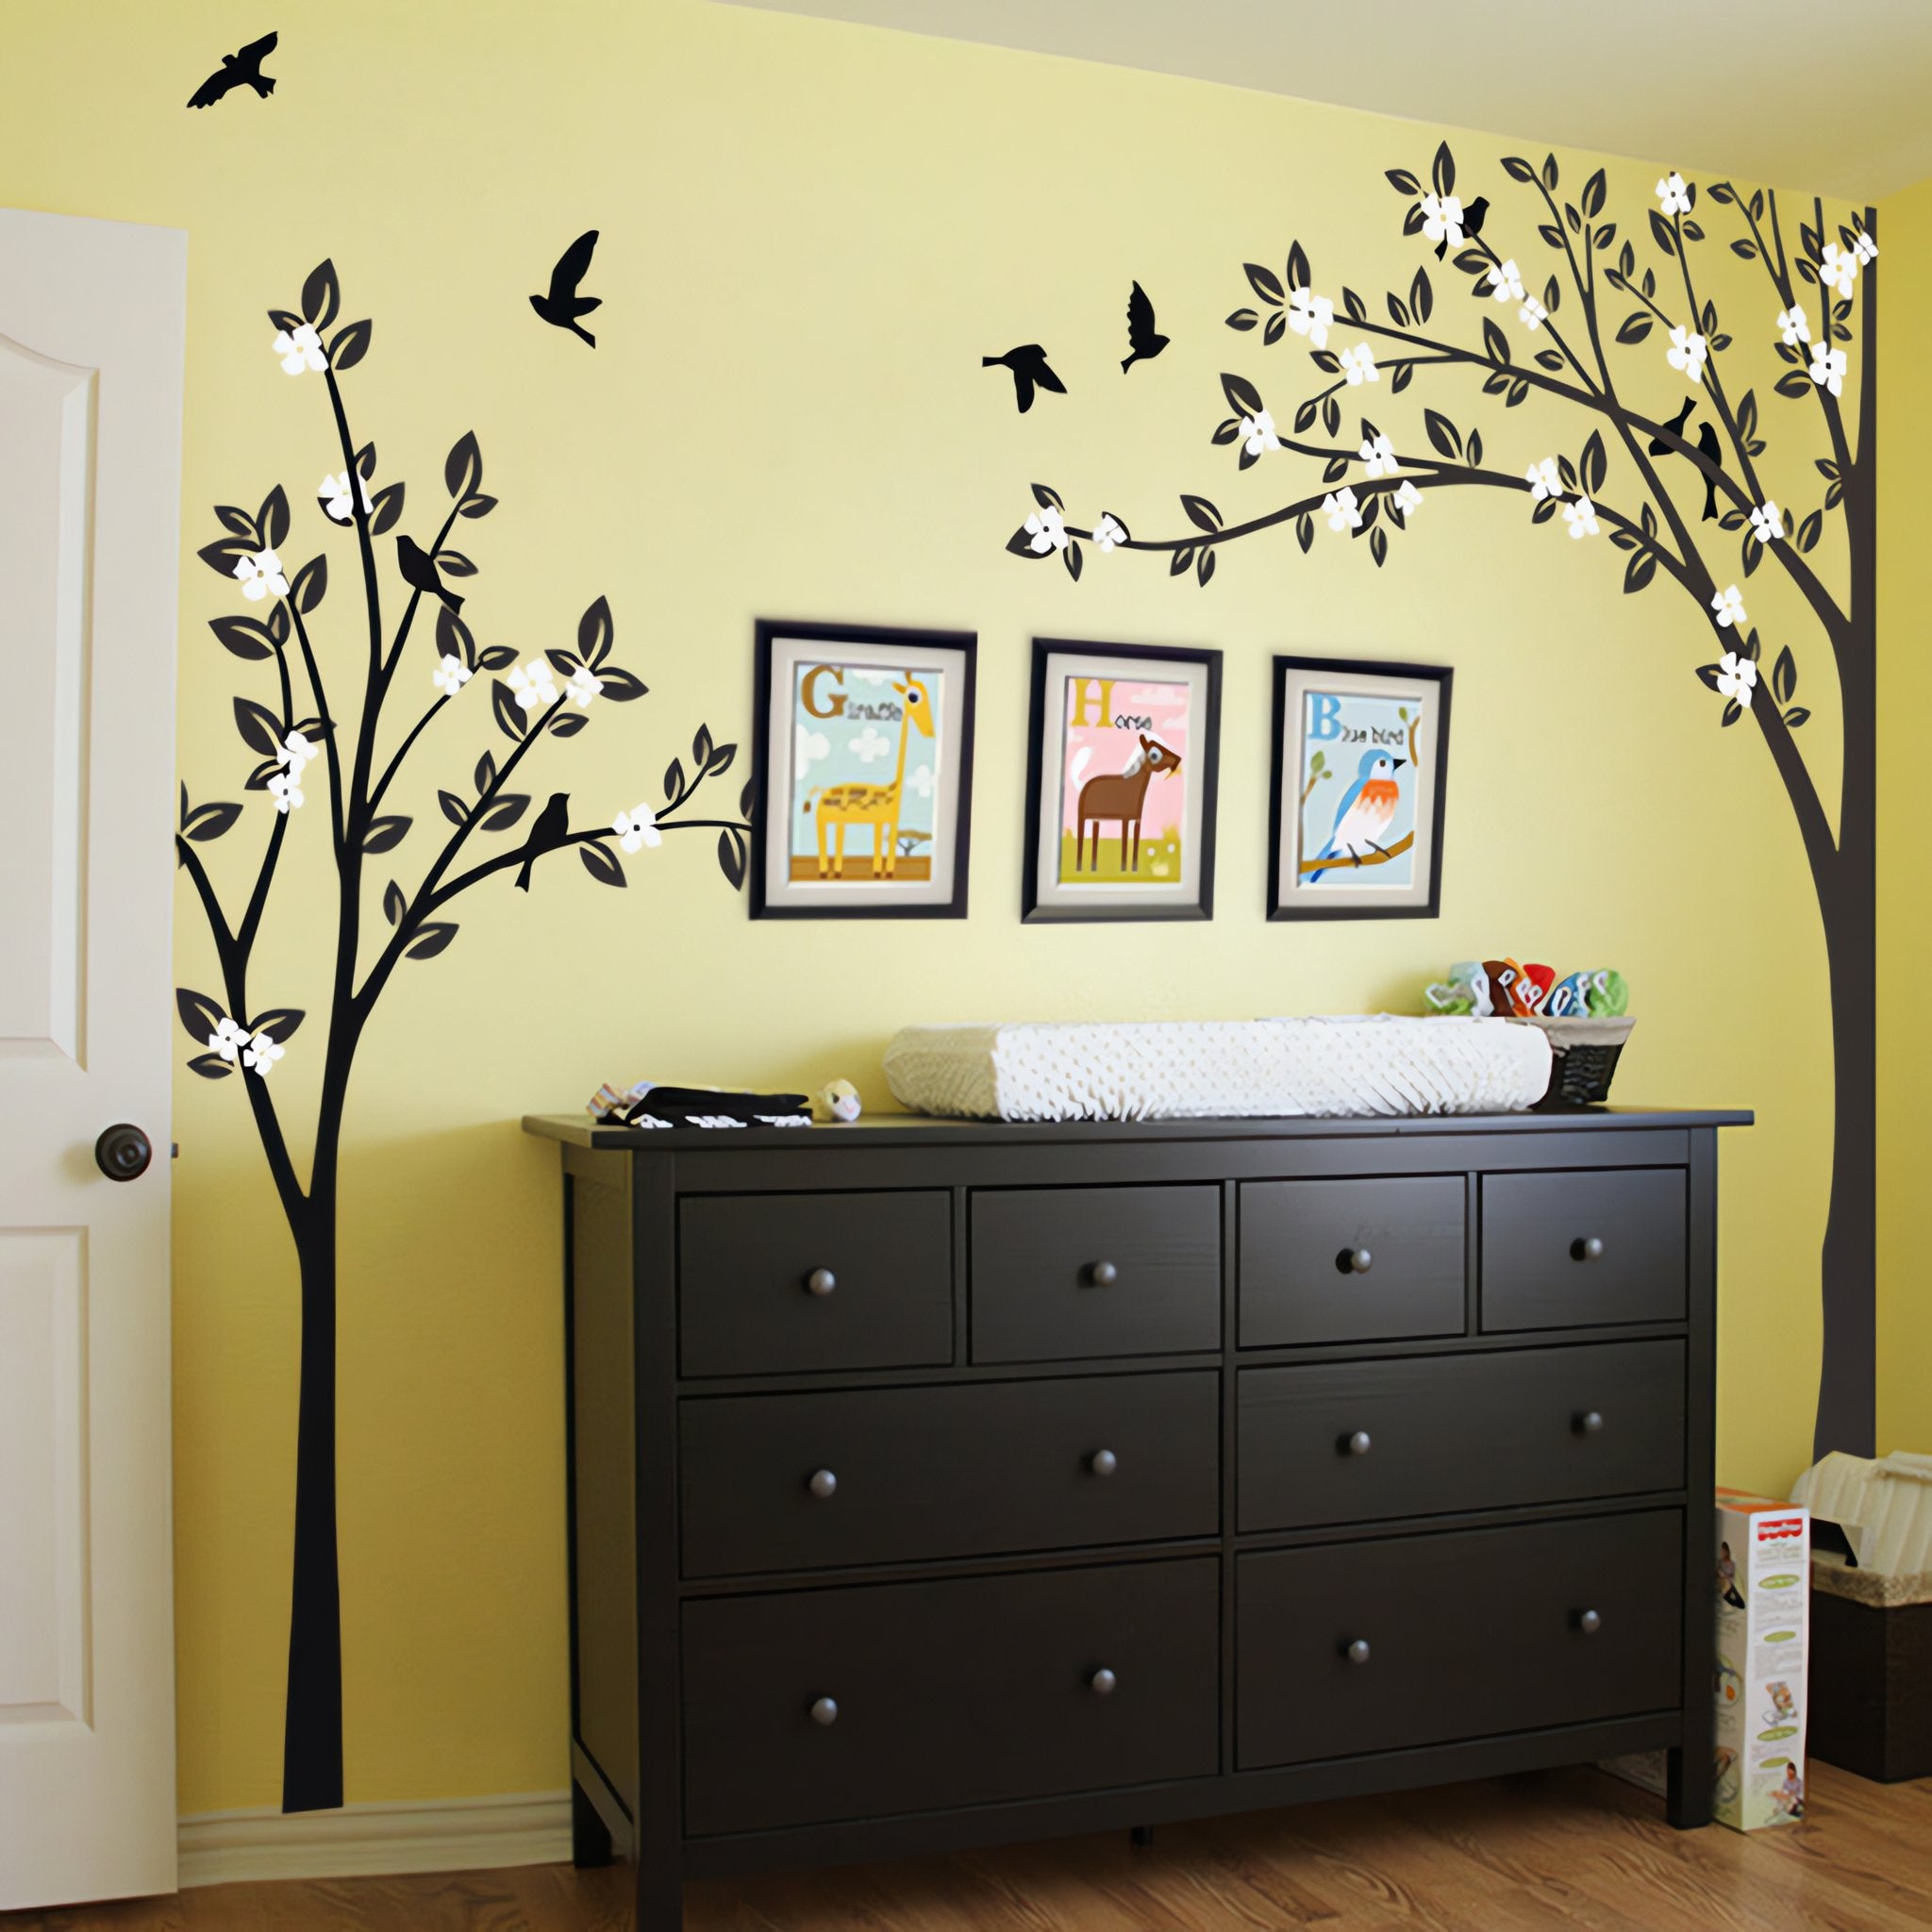 Tree wall sticker with2 trees and birds in a room with framed pictures and a dresser.